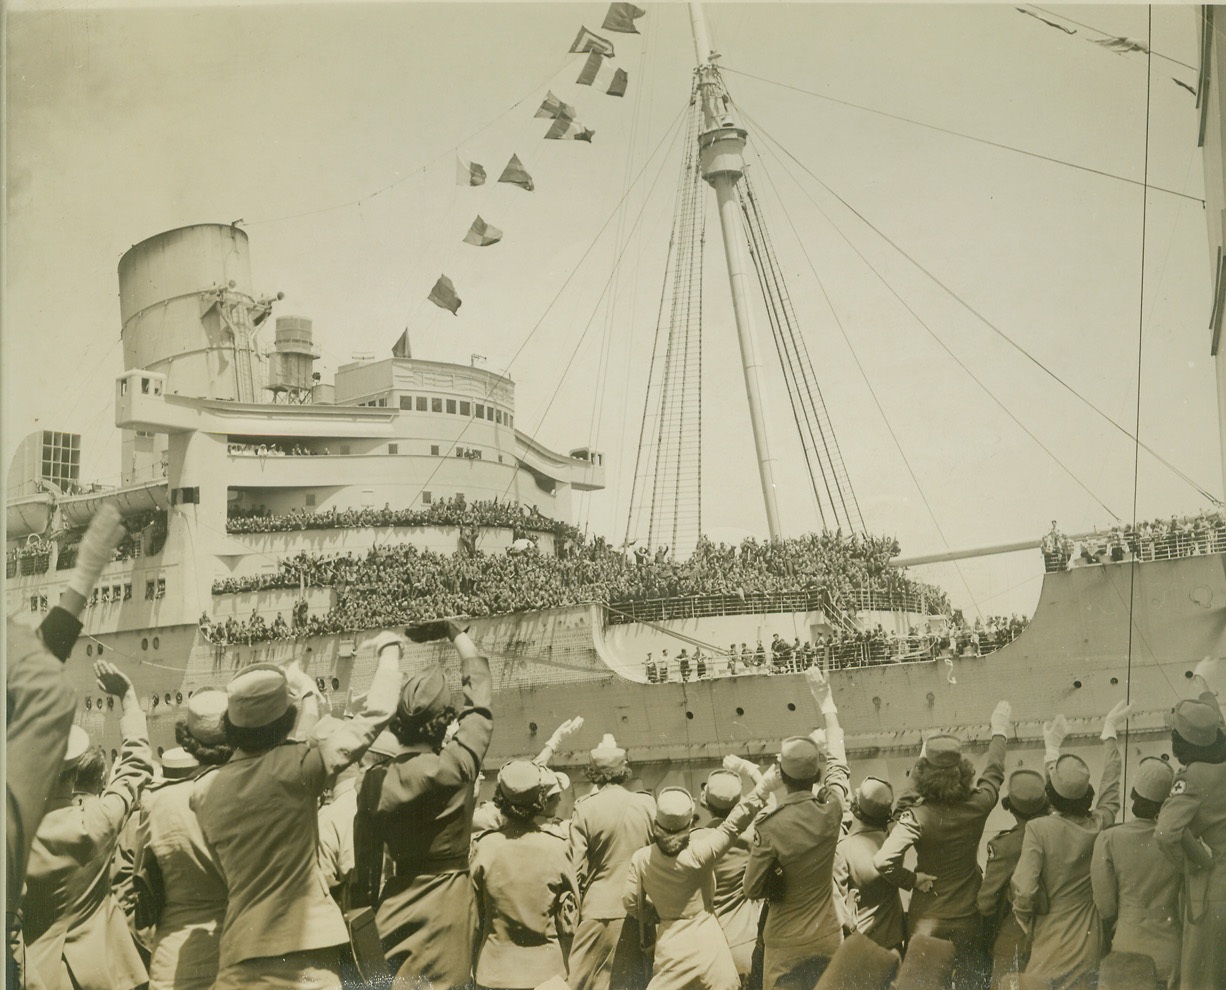 WELCOME HOME, BOYS!, 7/11/1945. NEW YORK – Returning soldiers jamming the decks of the giant transport Queen Mary get enthusiastic welcomes from Red Cross workers filling the pier. The Mary, one of eight transports which docked in New York today, carried 15,642 troops, including 7,000 members of the Canadian First Army, who boarded special trains for Canada immediately after docking. Credit: ACME;